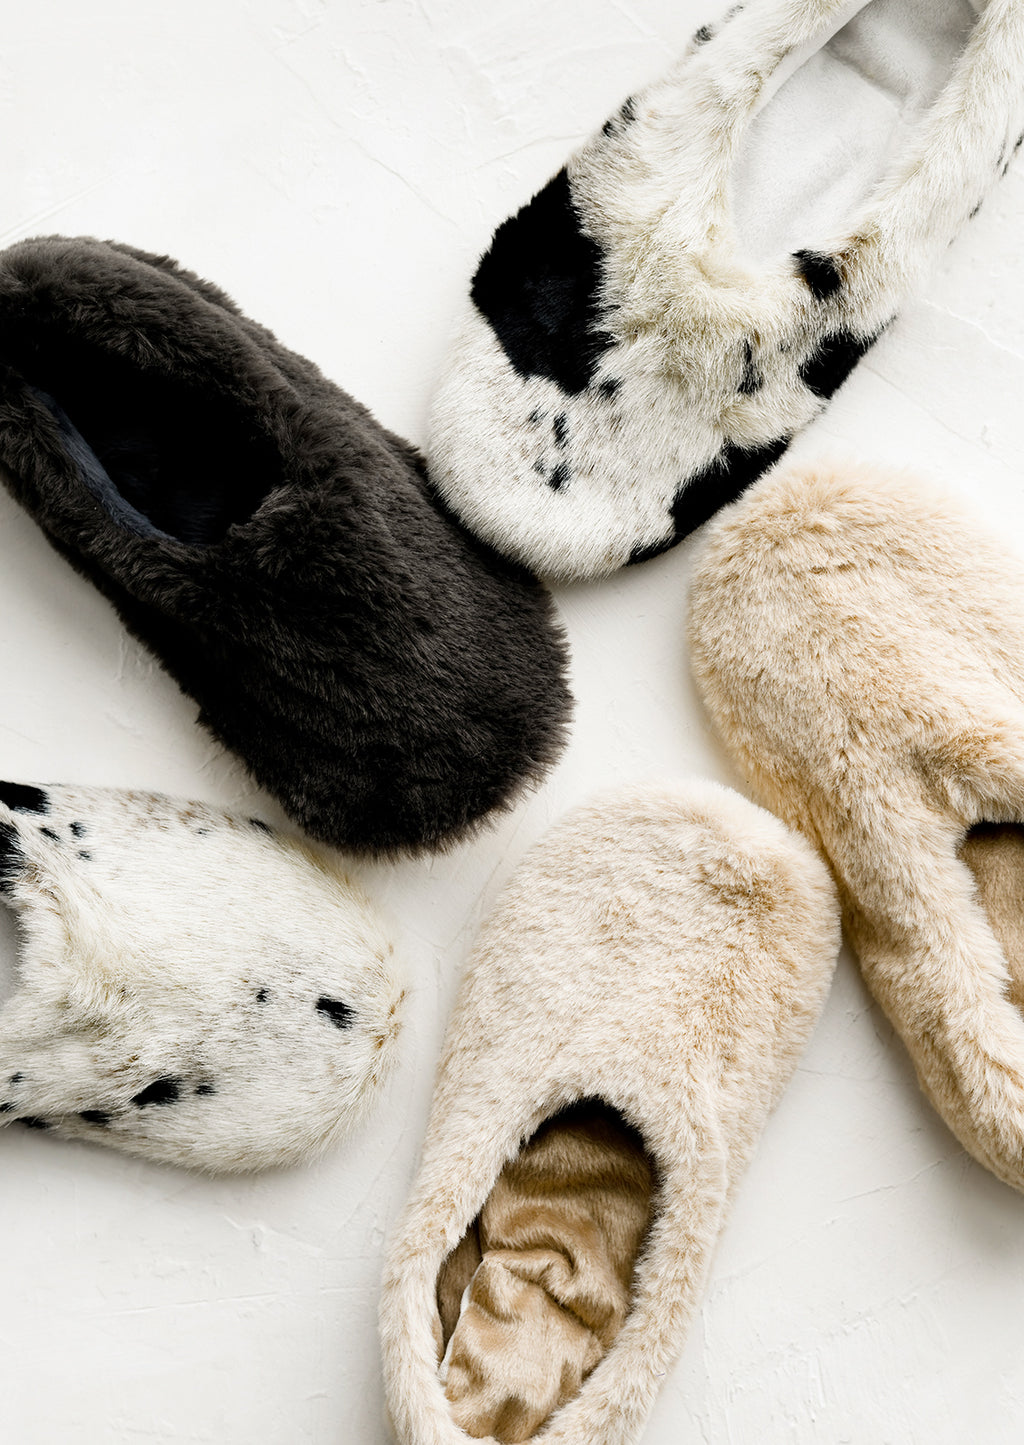 Women's 5-6 / Charcoal: Faux fur slippers in assorted colors.